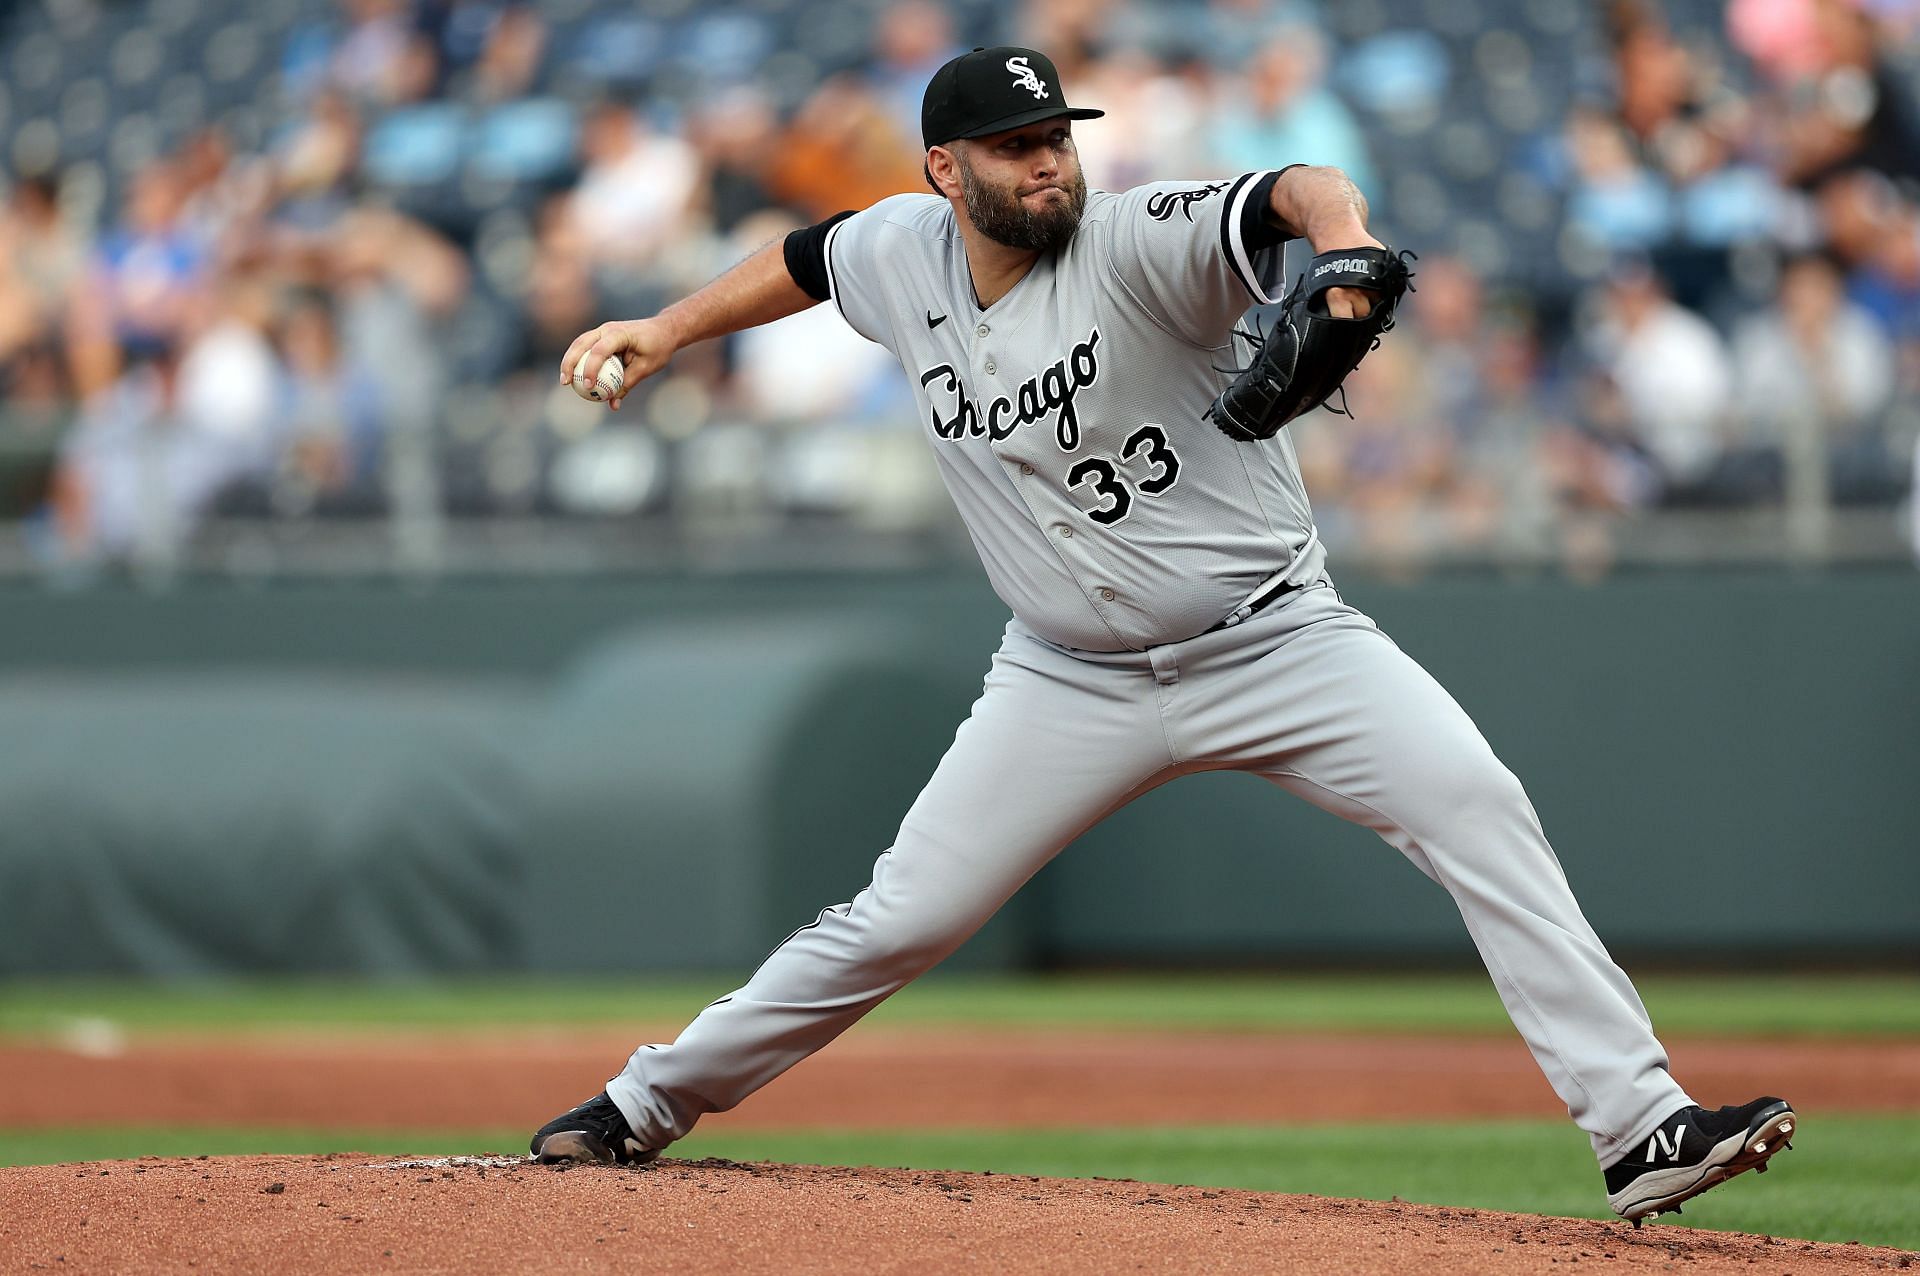 Lance Lynn and White Sox get shelled in series finale v. Giants